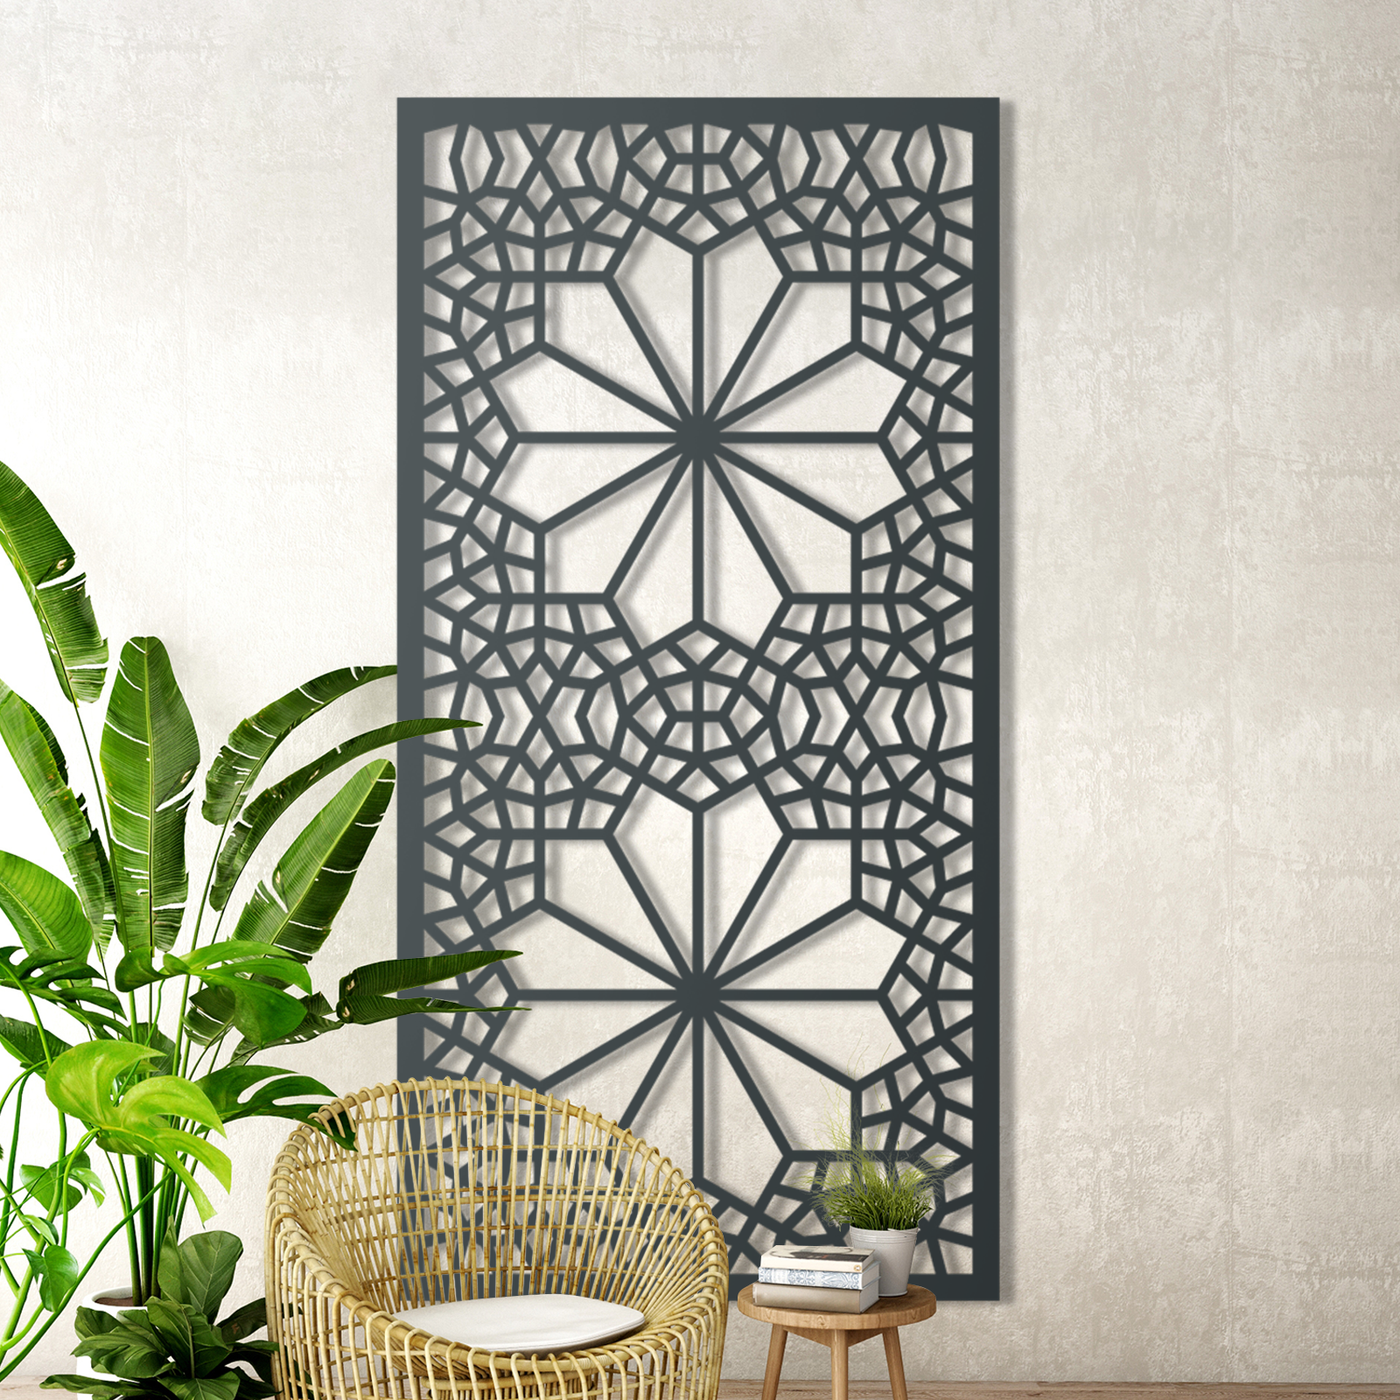 Ordinata Metal Garden Screen: A Great Way to Add Style and Privacy to Your Outdoor Space